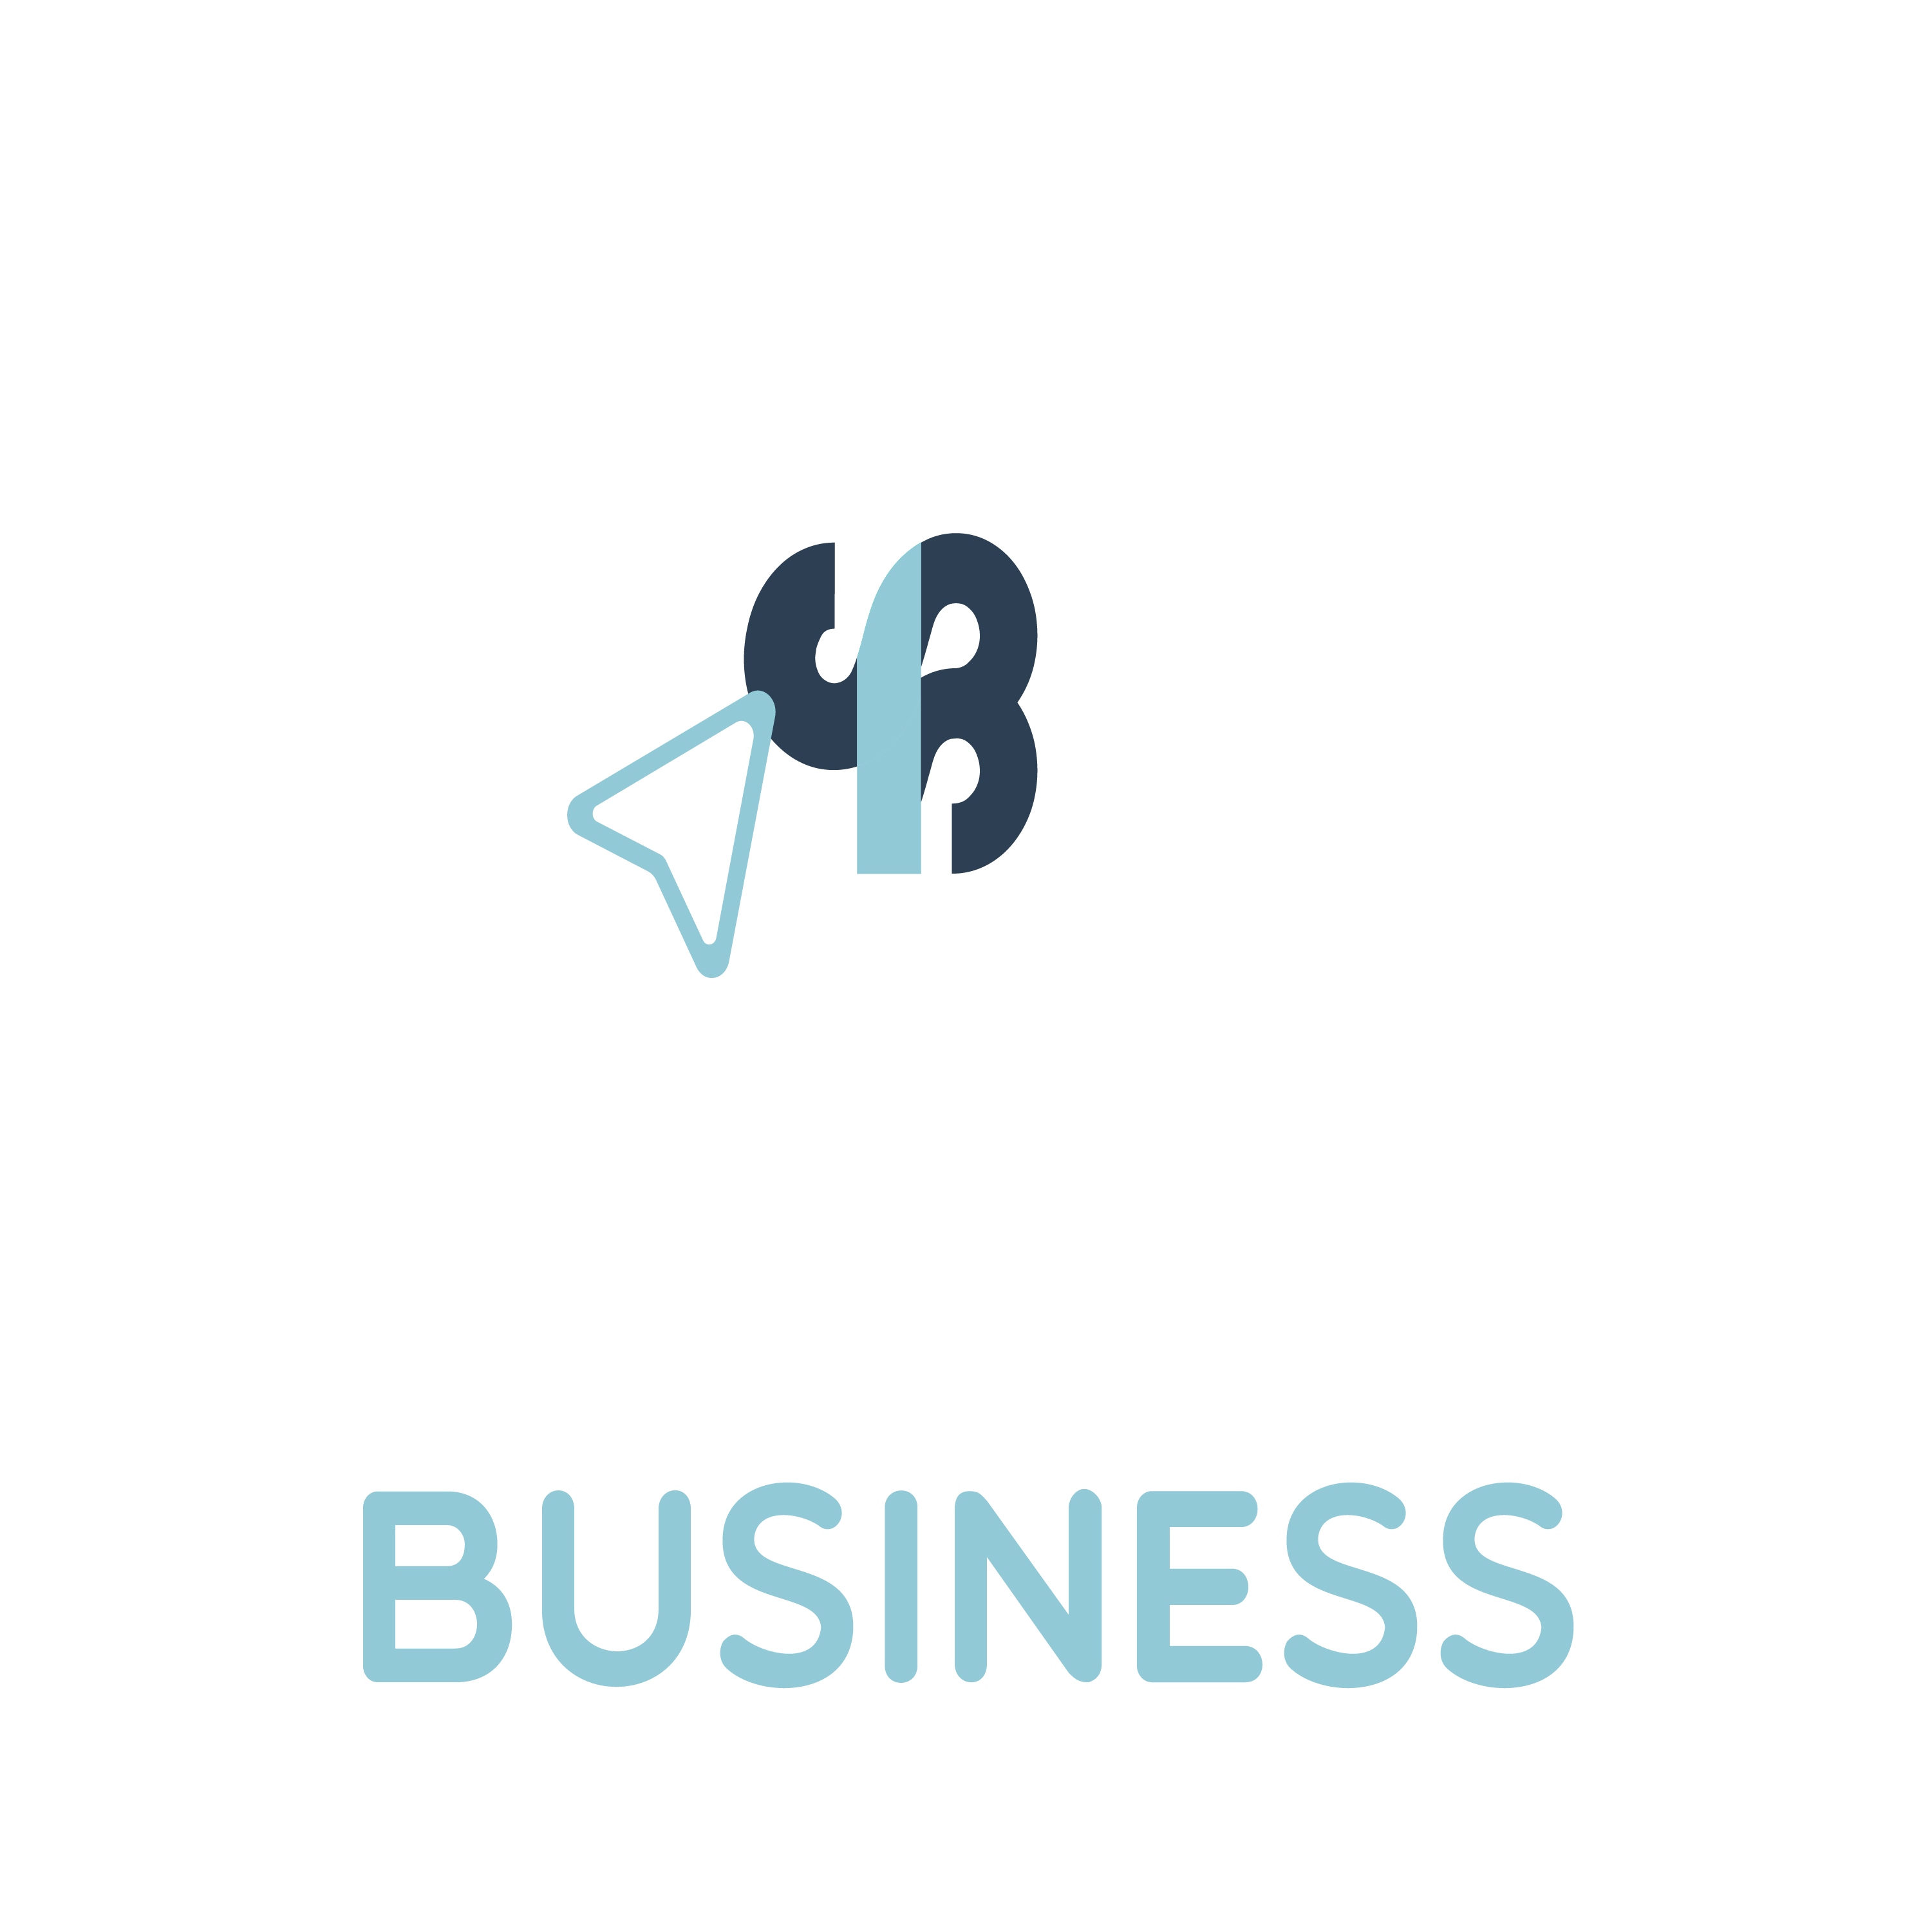 Shoppable: #1 B2B platform for procurement of products in bulk